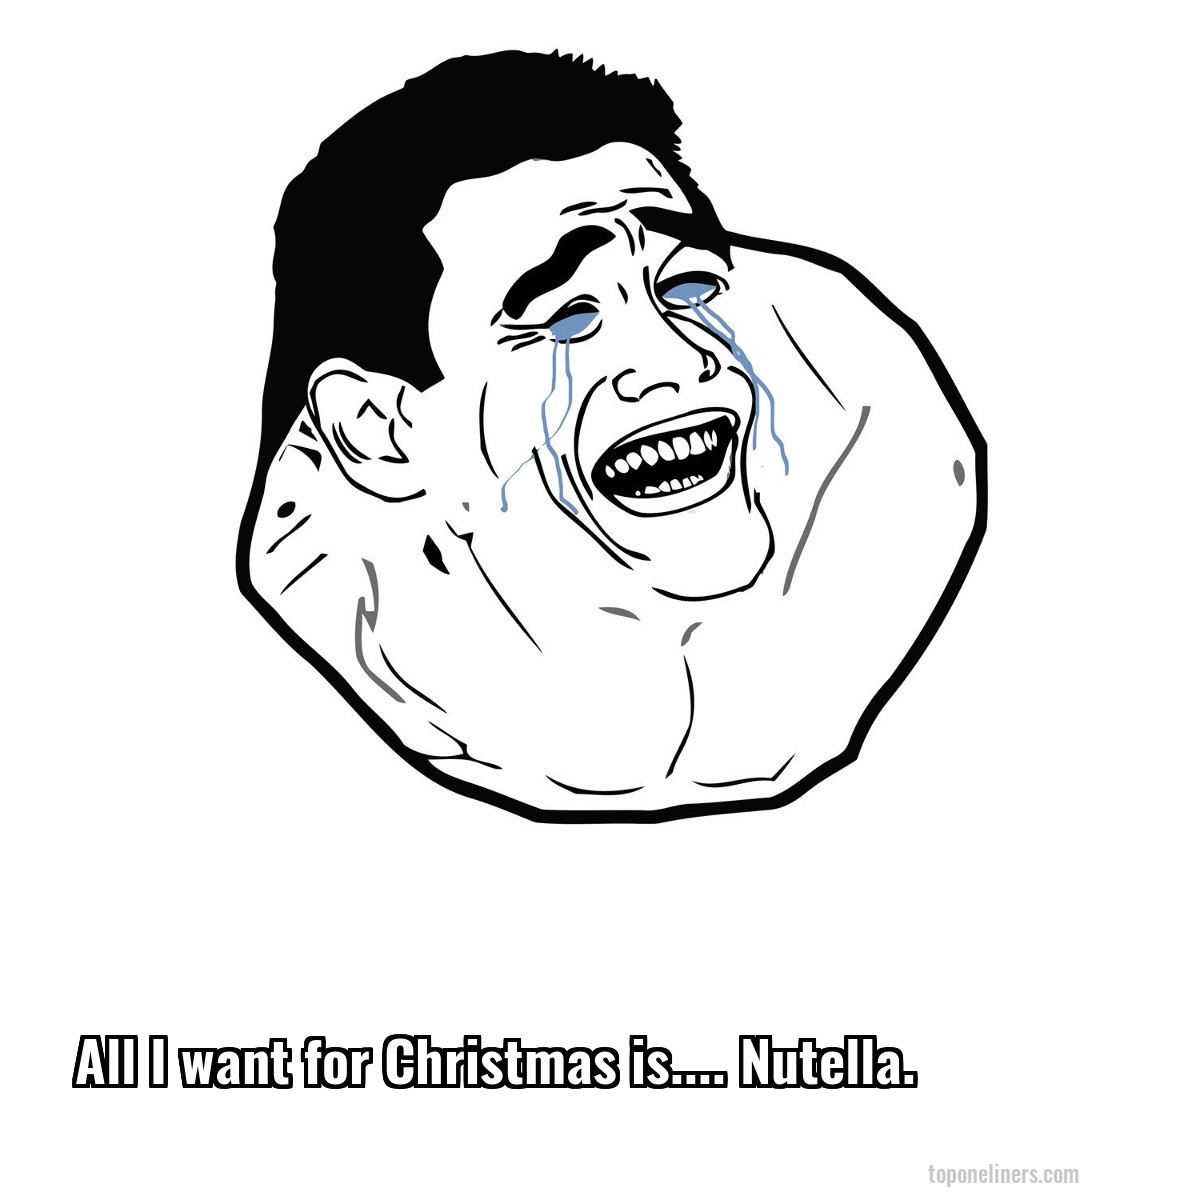 All I want for Christmas is.... Nutella.